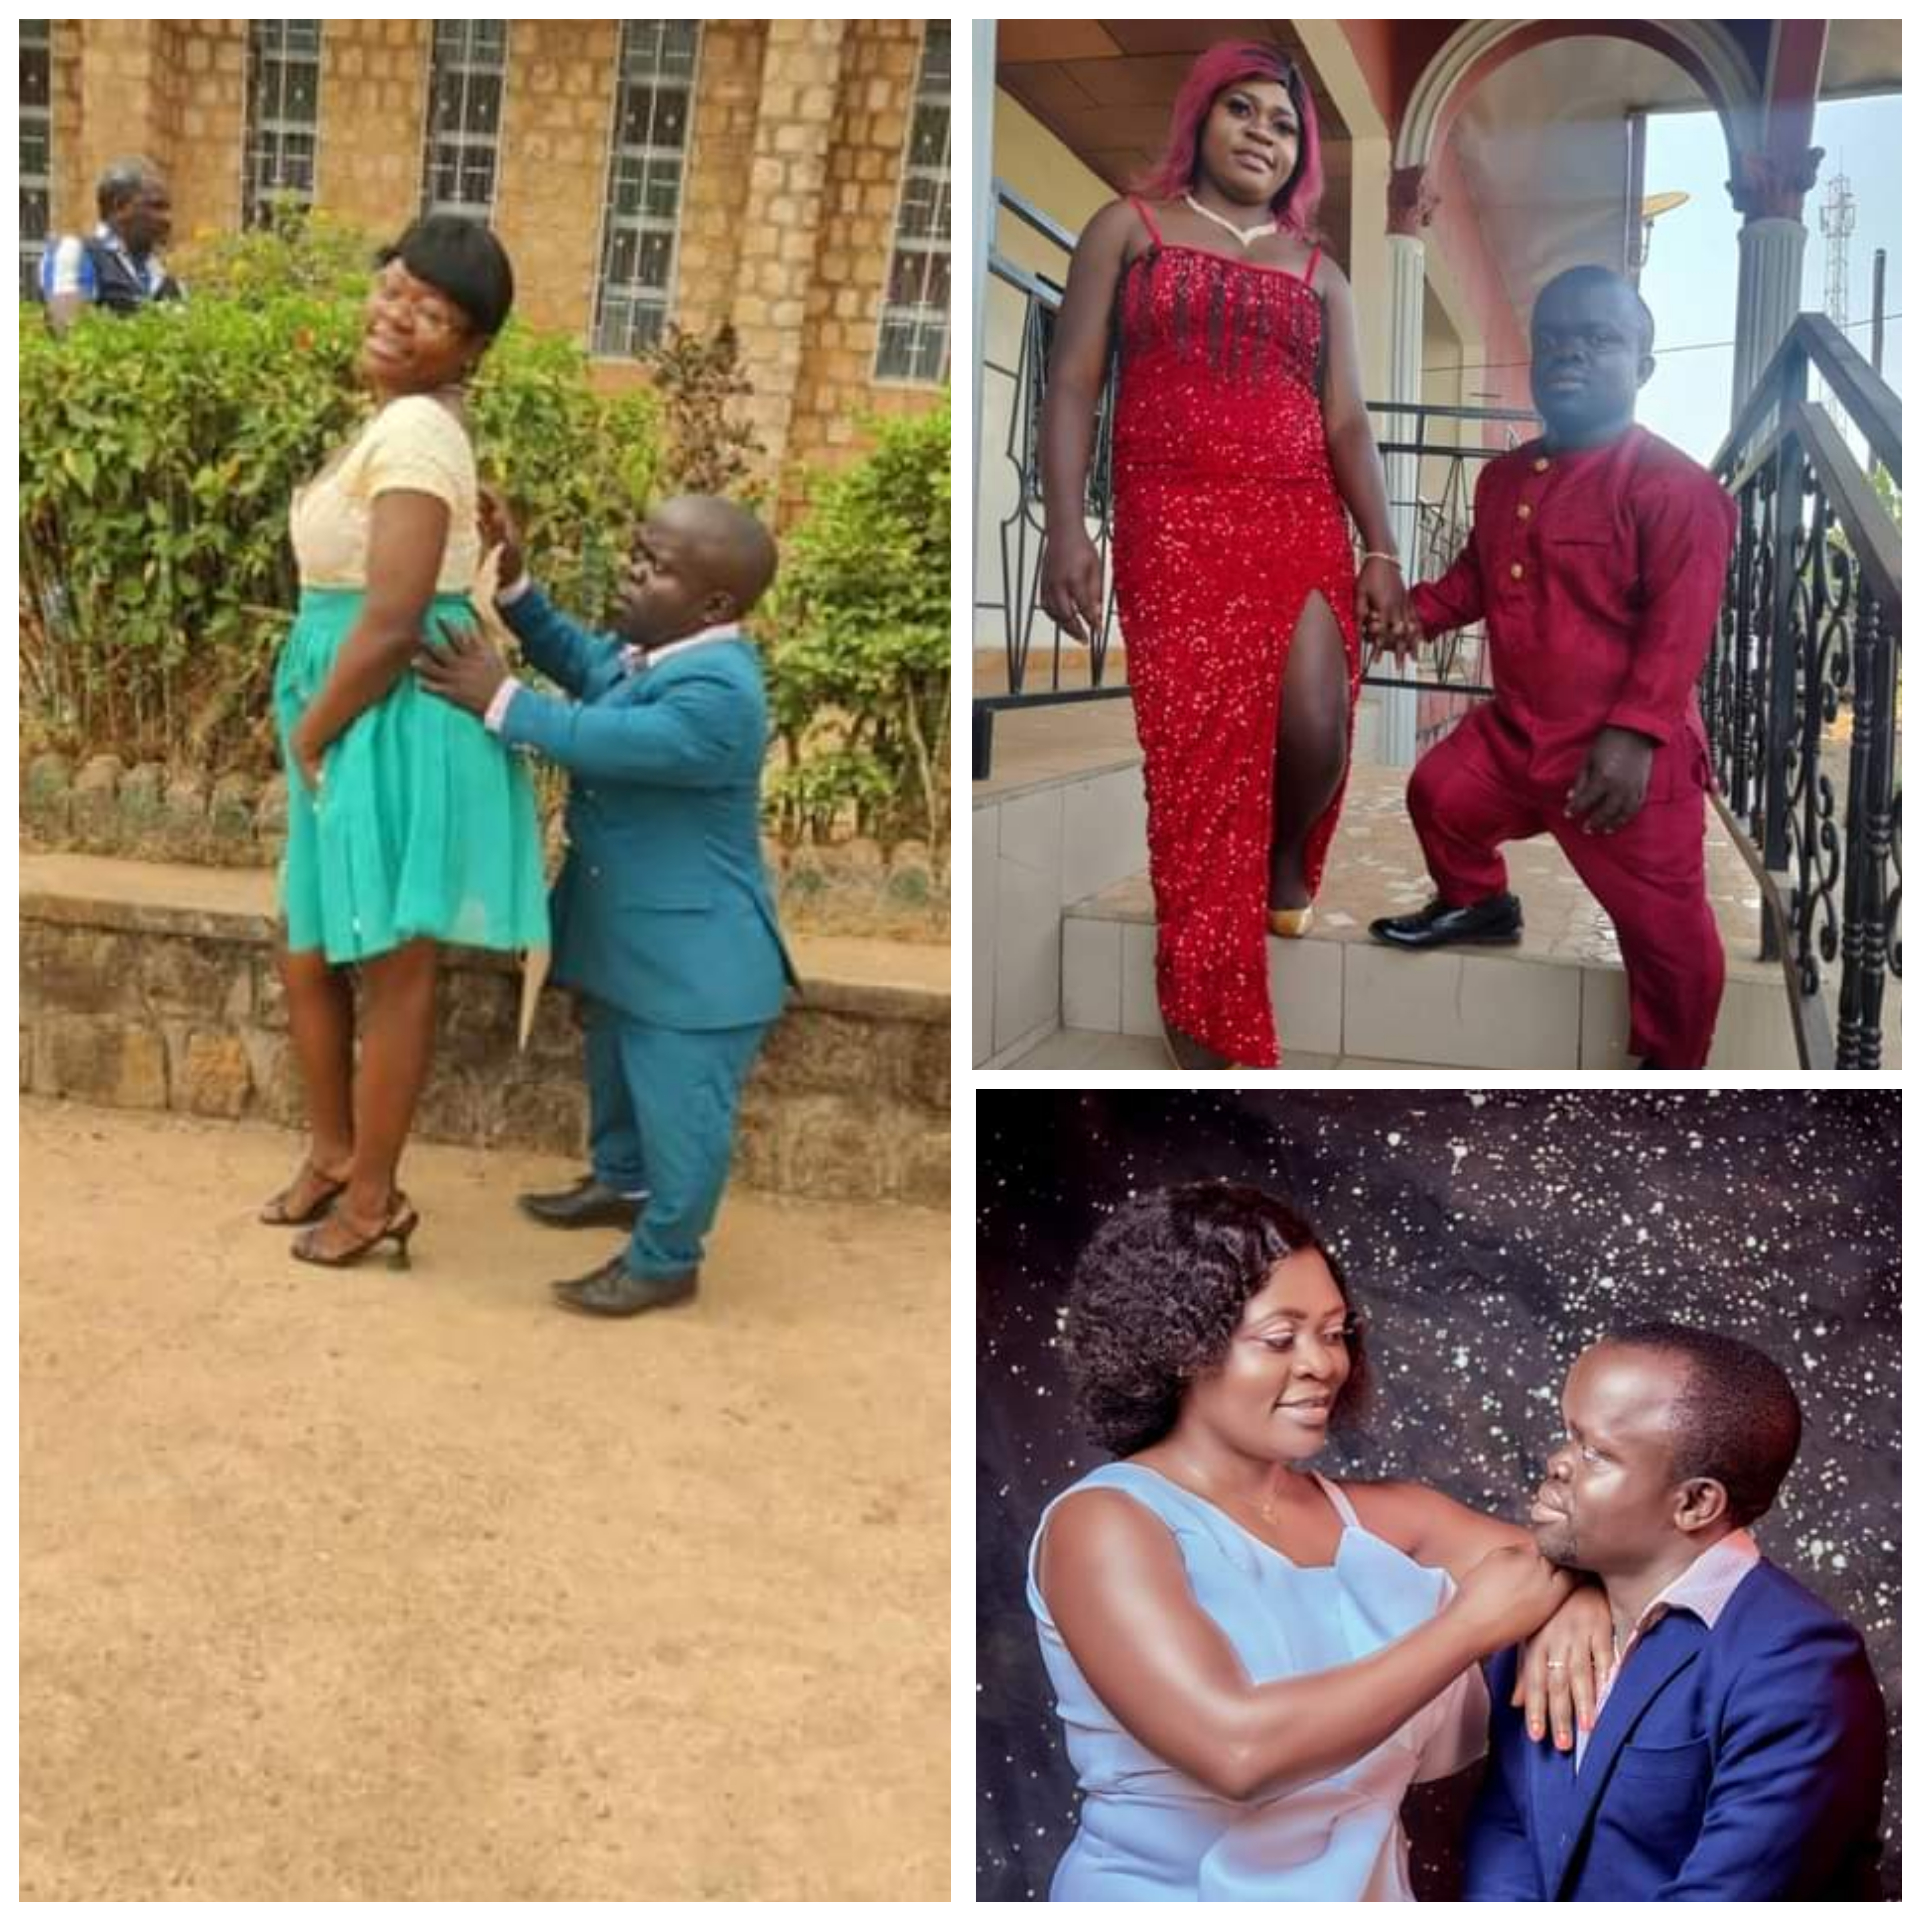 “SHE IS GOD-FEARING AND GIVES ME MAXIMUM RESPECT” – 39-YEAR-OLD TEACHER FINDS LOVE AFTER BEING REJECTED BY WOMEN DUE TO HIS HEIGHT